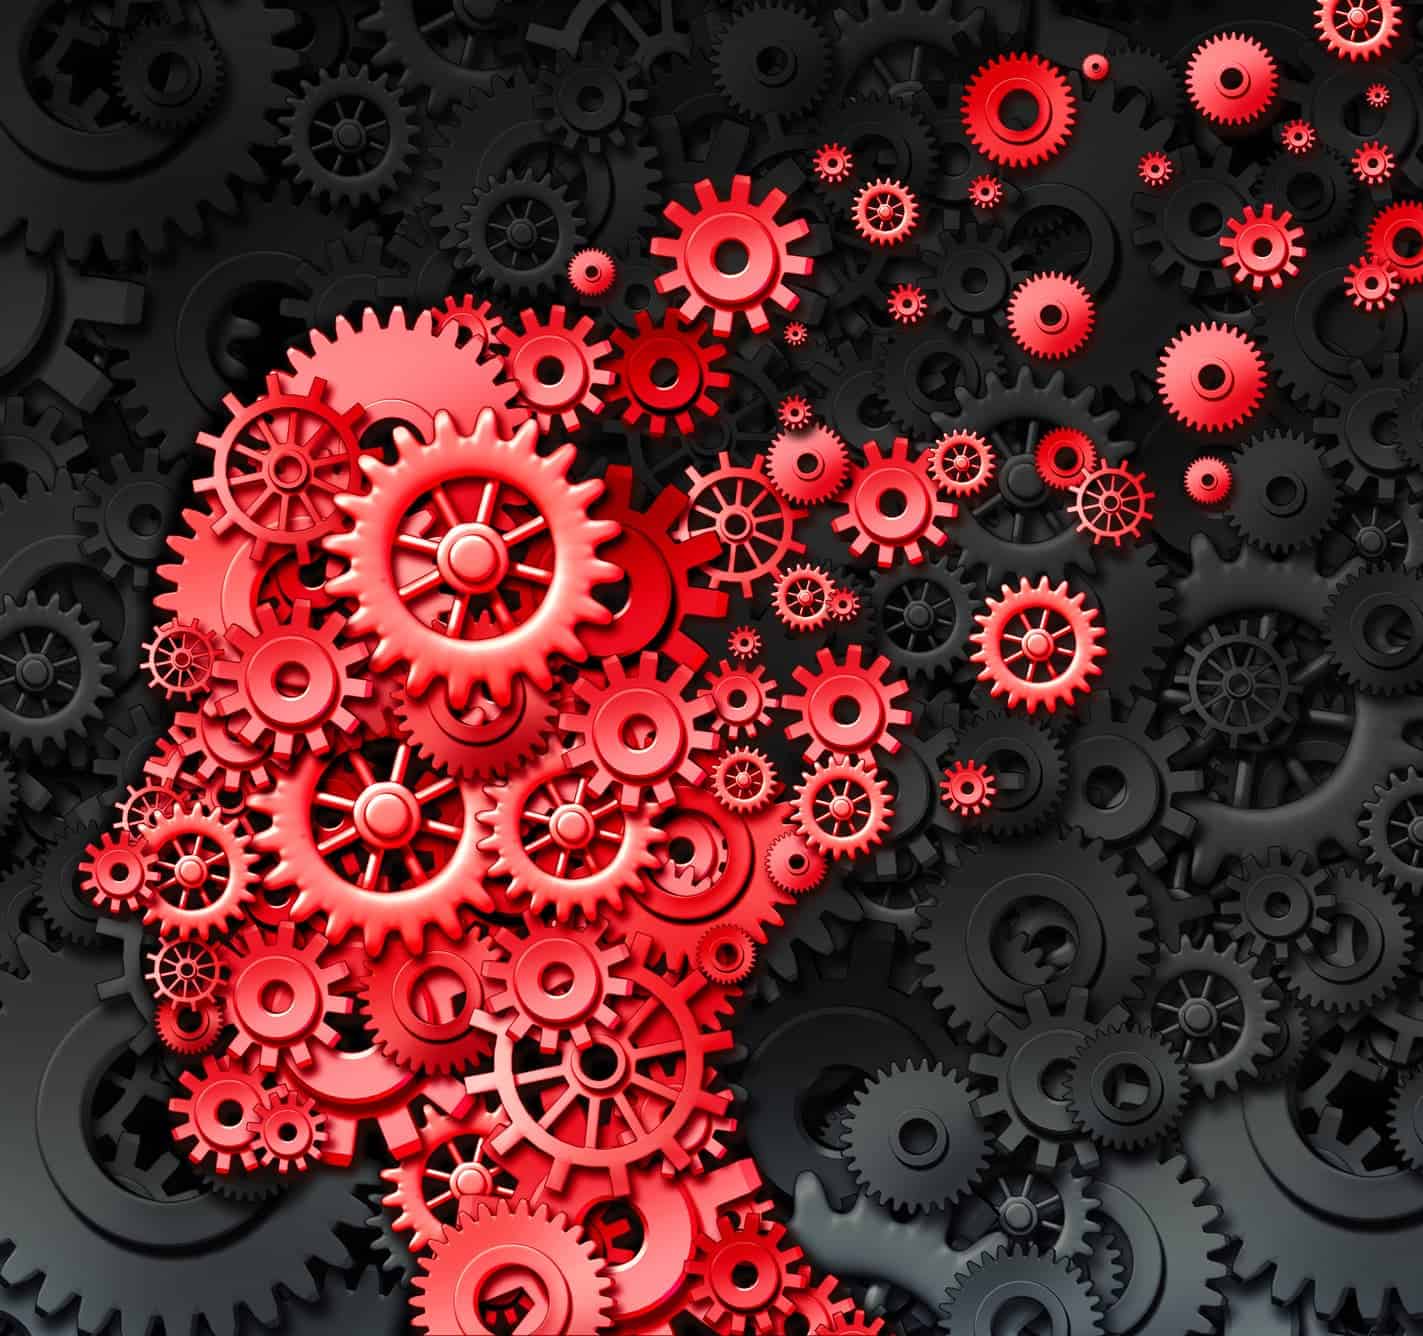 Human brain injury or damage and neurological loss or losing memory and intelligence due to physical concussion trauma and head injury or alzheimer disease caused by aging with red gears and cogs in the shape of a thinking mind.